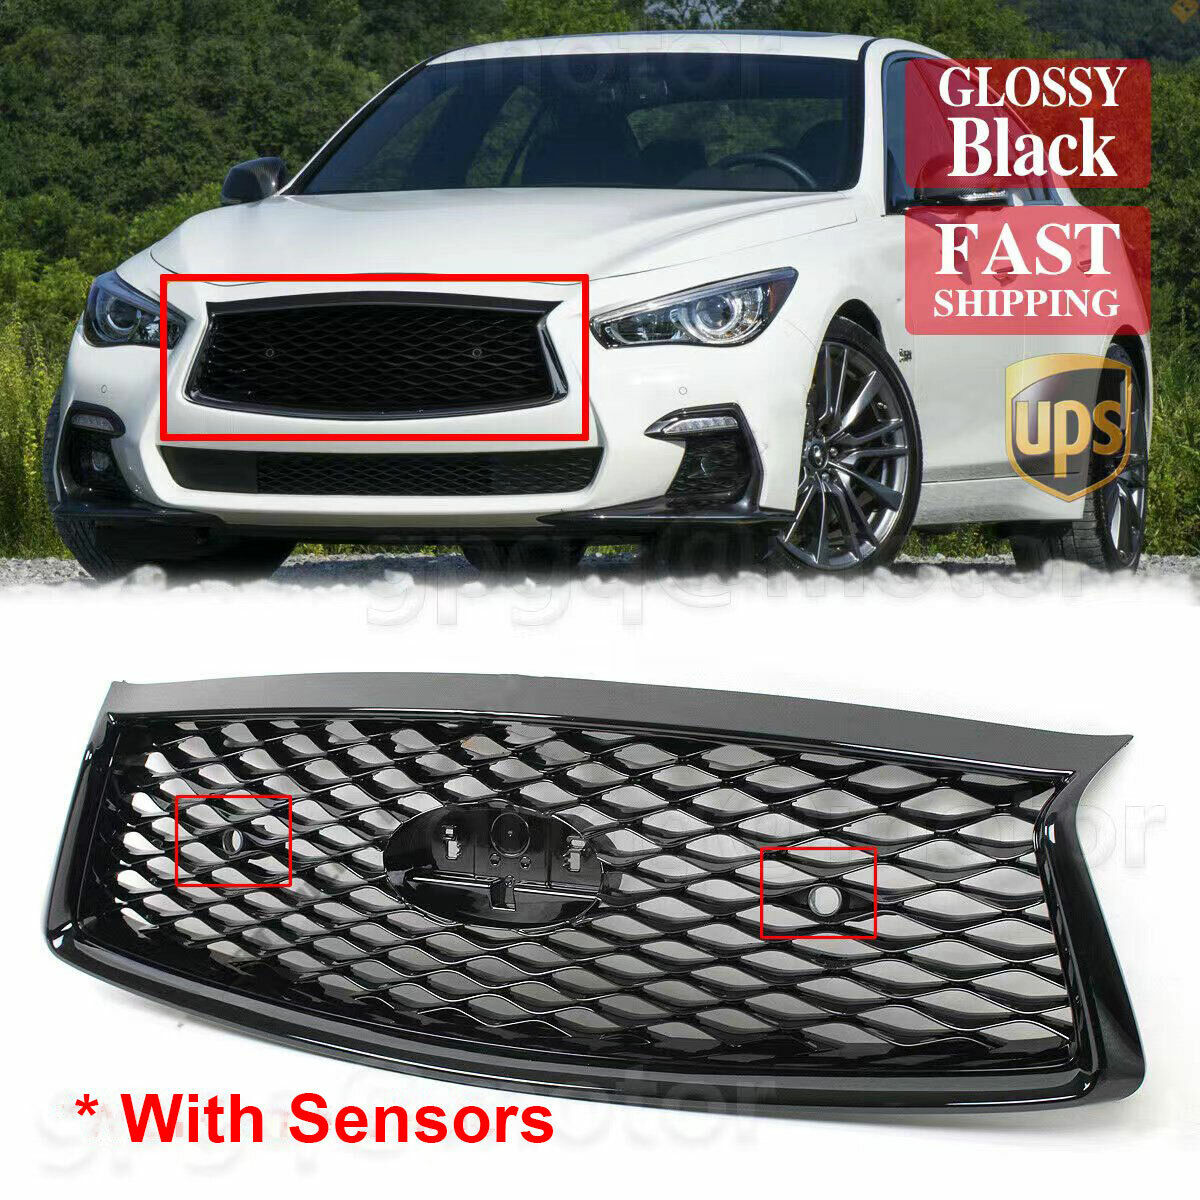 For Infiniti Q50 2018-20 Glossy Black Front Hood Bumper Upper Grill With Sensors